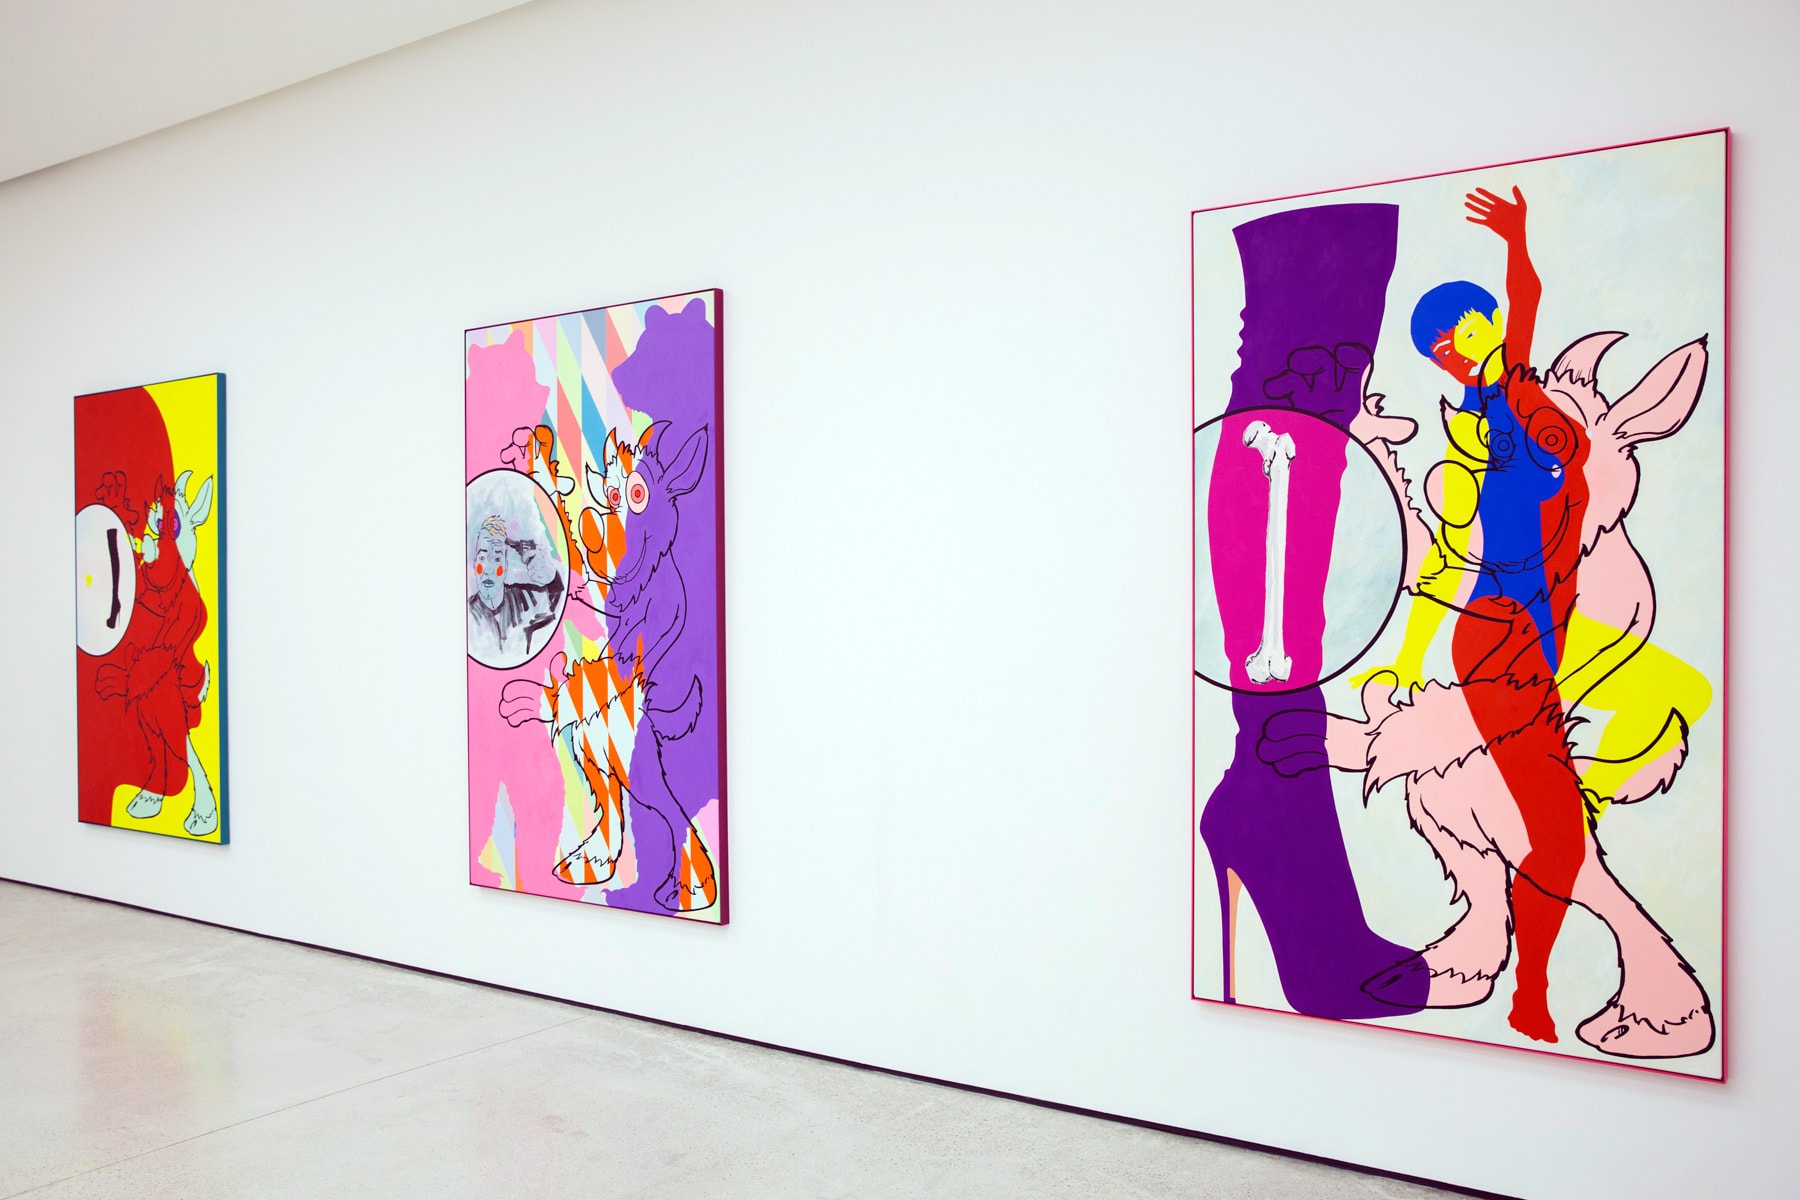 Eddie Peake on Working With Kendrick Lamar and Breaking Down Barriers Where You Belong Exhibition 2016 White Cube Hong Kong Central Artist Paintings Sculpture Videos Music Interviews